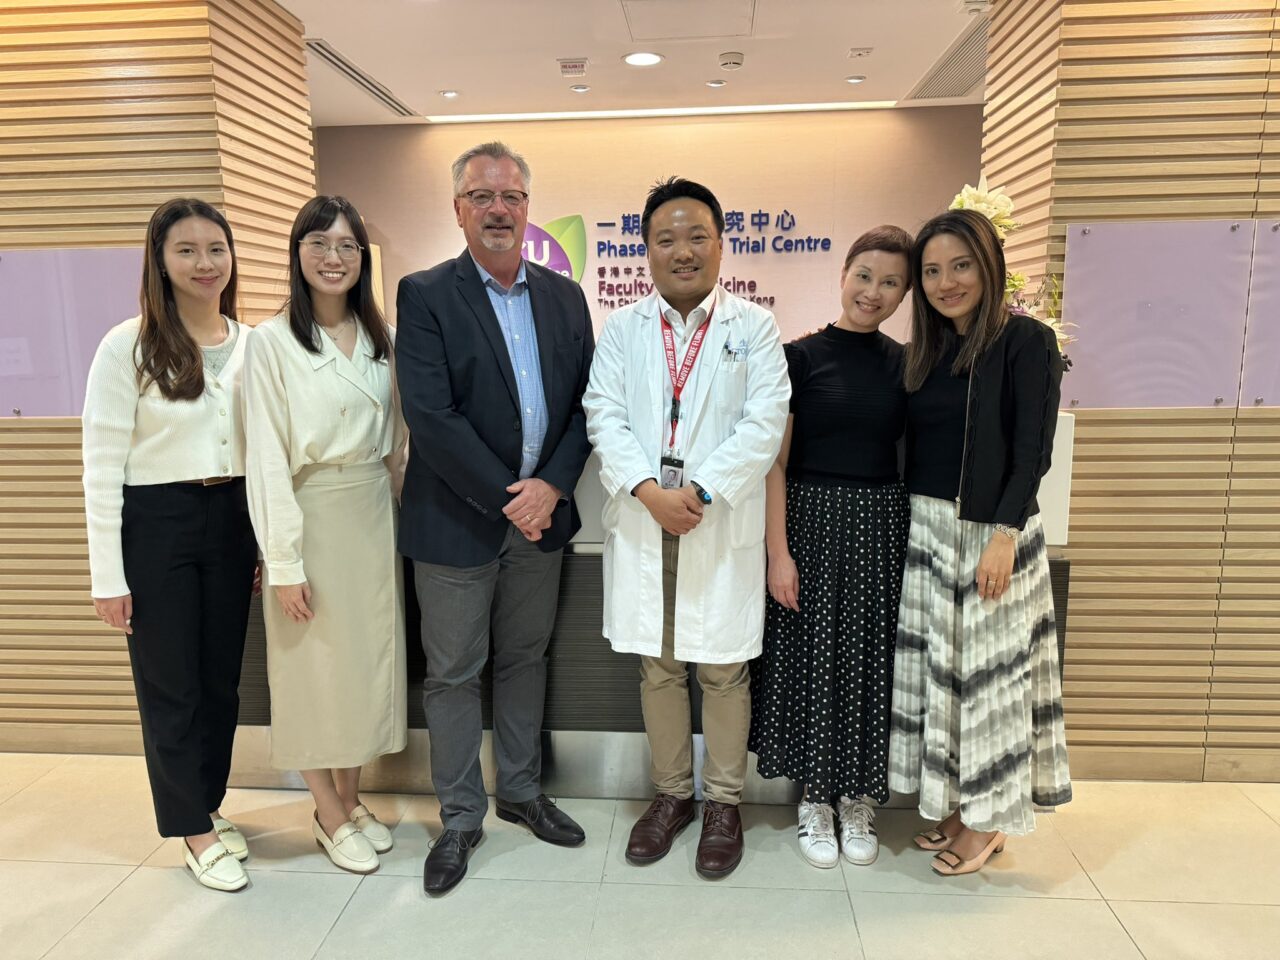 Herbert Loong: Thanks Harald A. Weber and local Pfizer team for your visit to our Faculty of Medicine of the Chinese University of Hong Kong